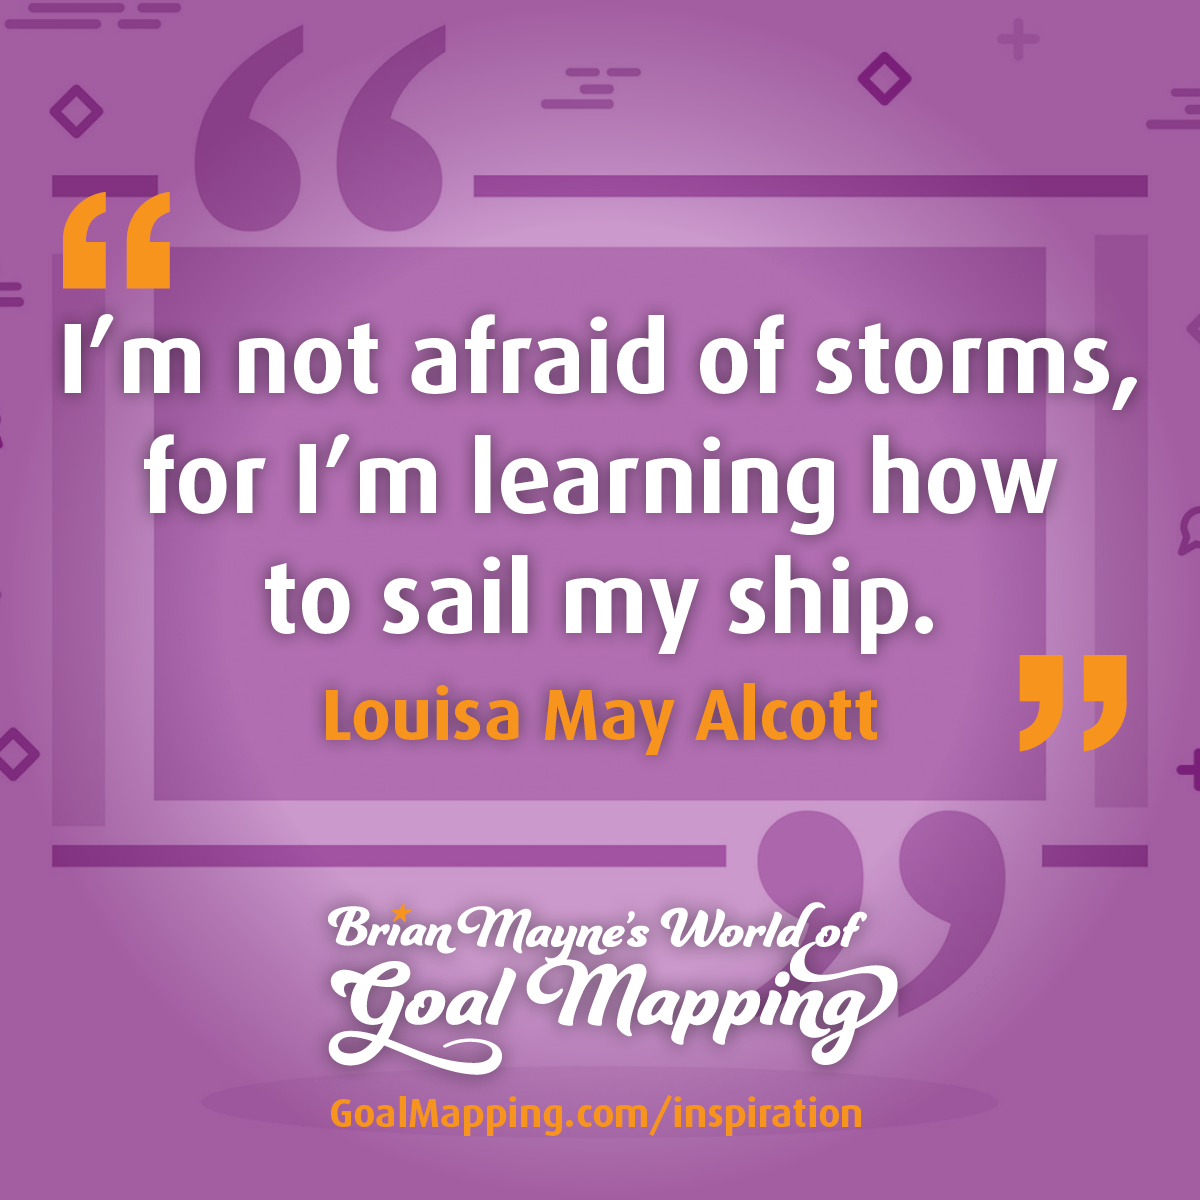 "I’m not afraid of storms, for I’m learning how to sail my ship." Louisa May Alcott